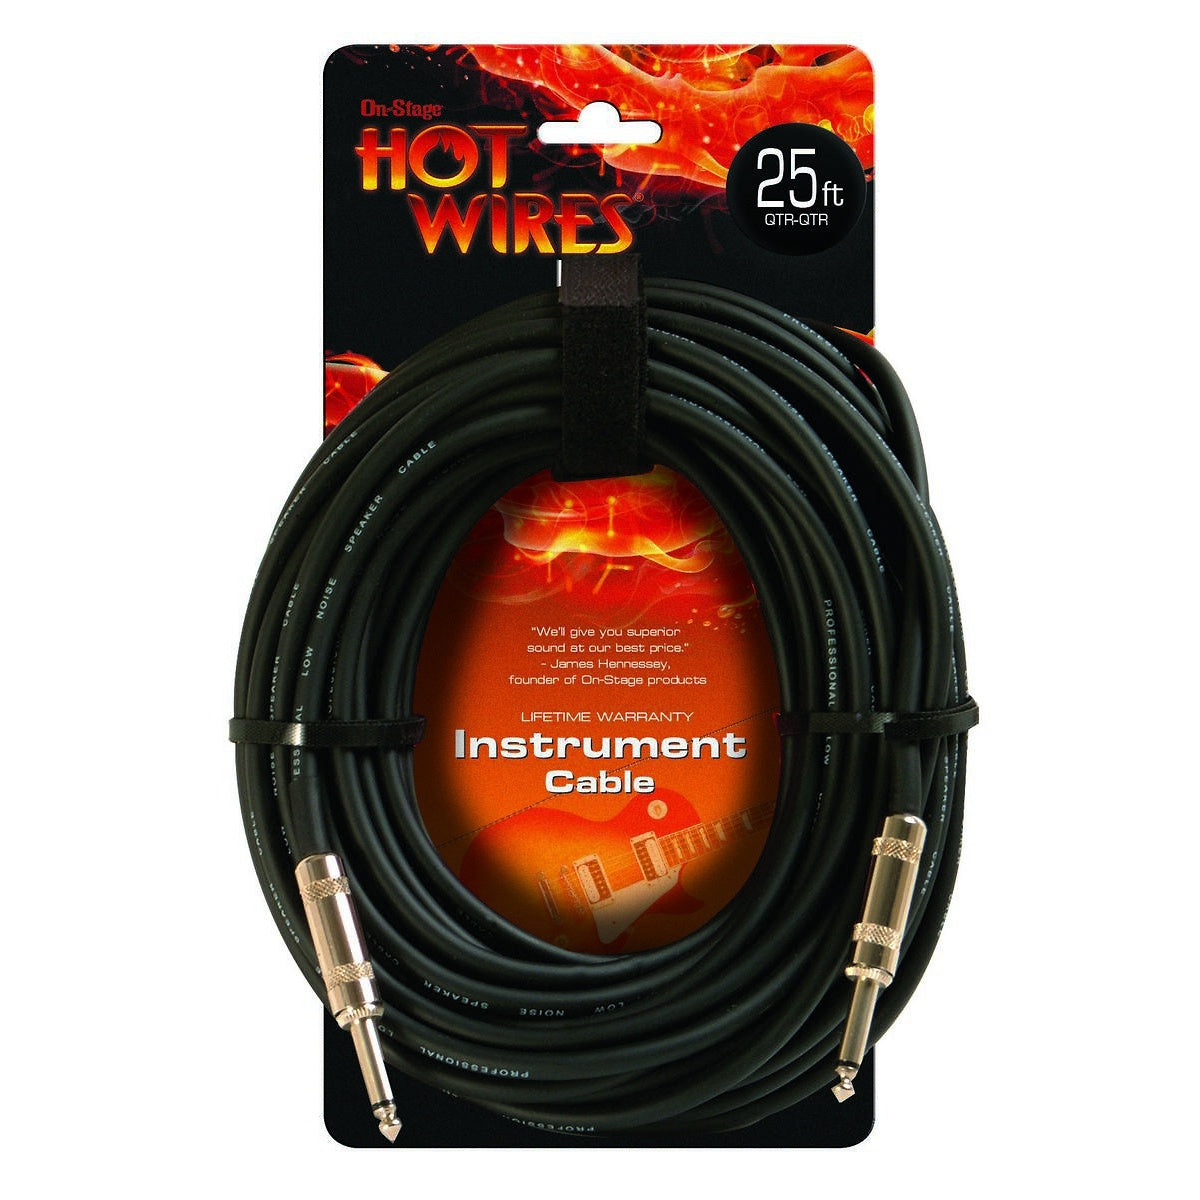 Hot Wires Guitar Instrument Cable, 25 Foot